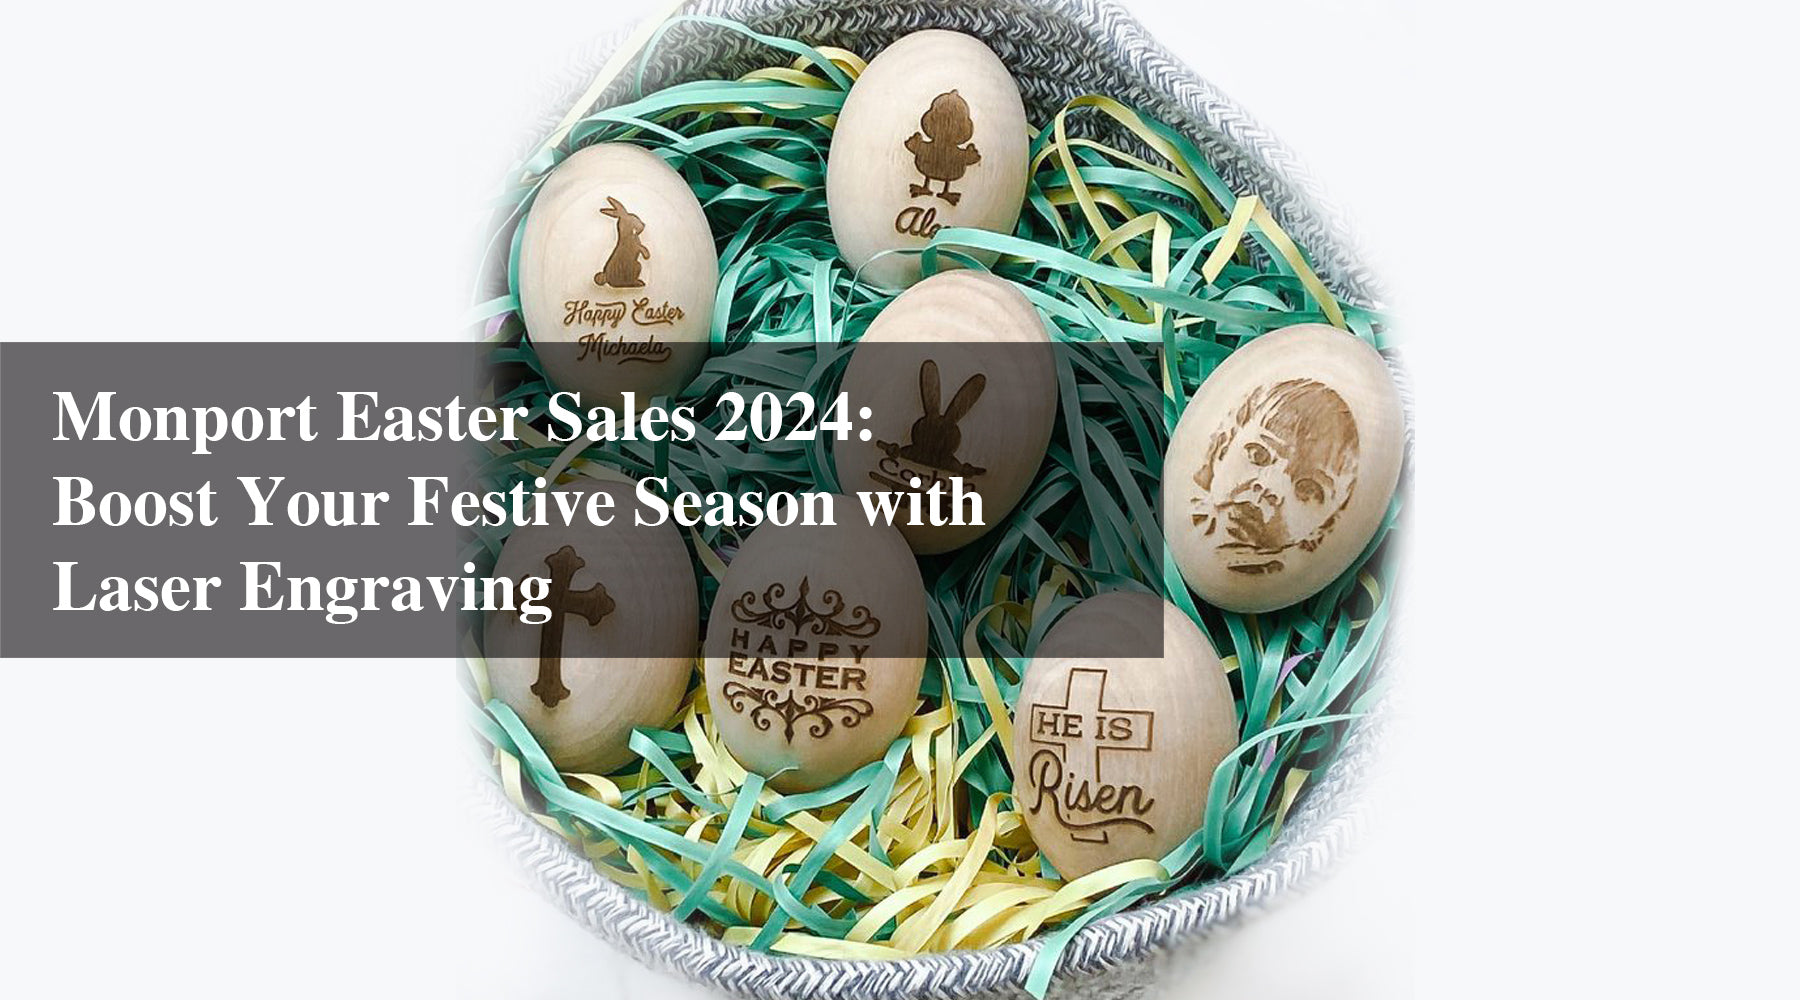 Monport Easter Sales 2024: Boost Your Festive Season with Laser Engraving